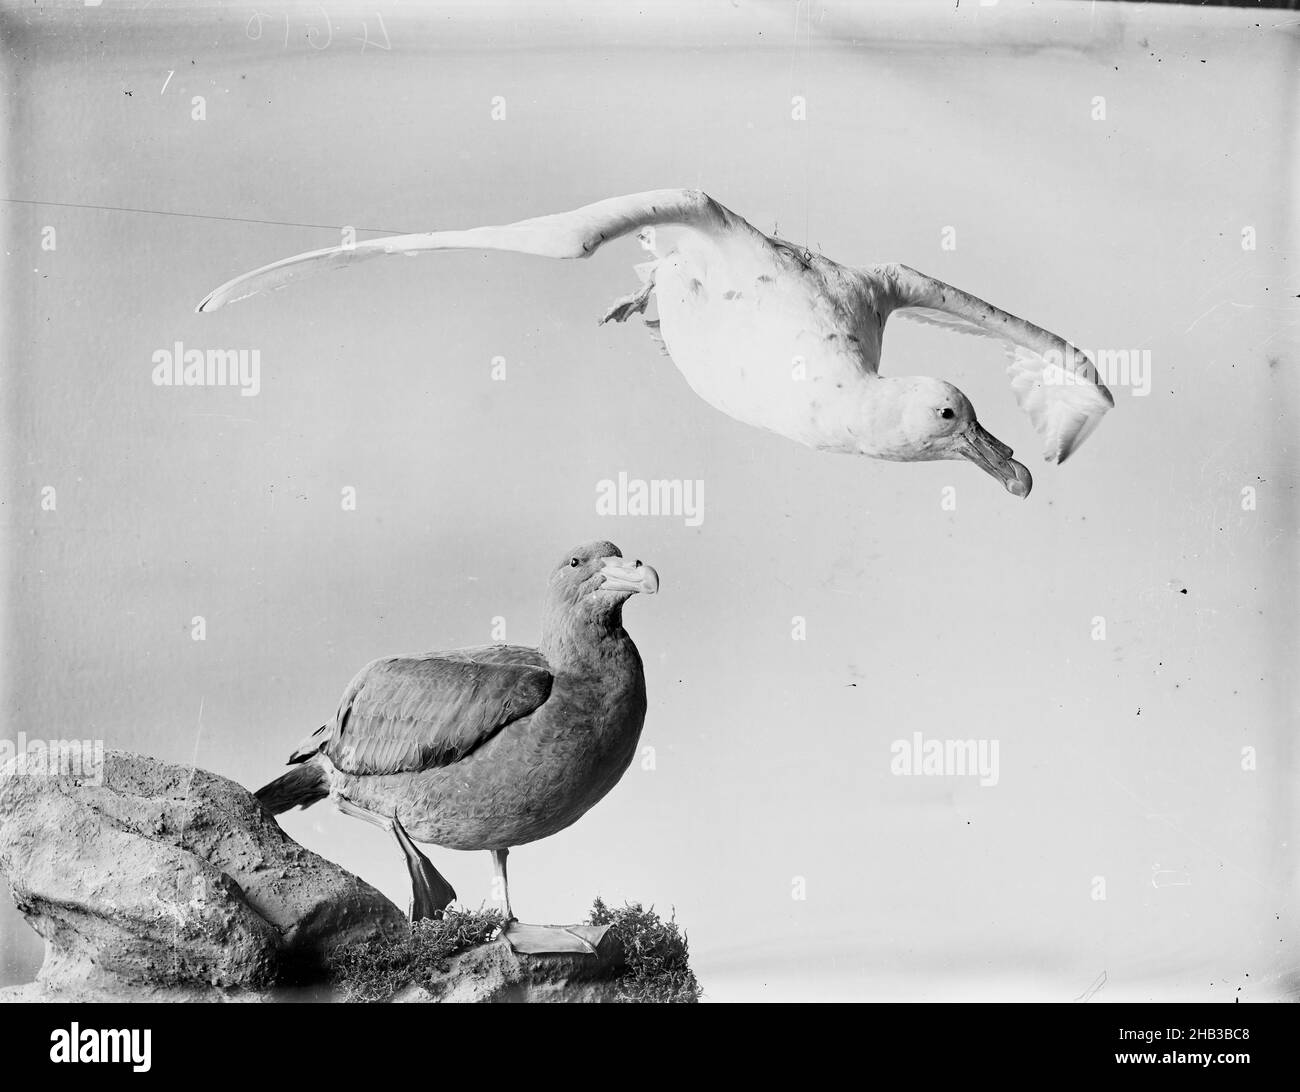 [Nelly or Giant Petrel], Burton Brothers studio, photography studio, 1889, Dunedin, black-and-white photography, Display of two stuffed birds Stock Photo